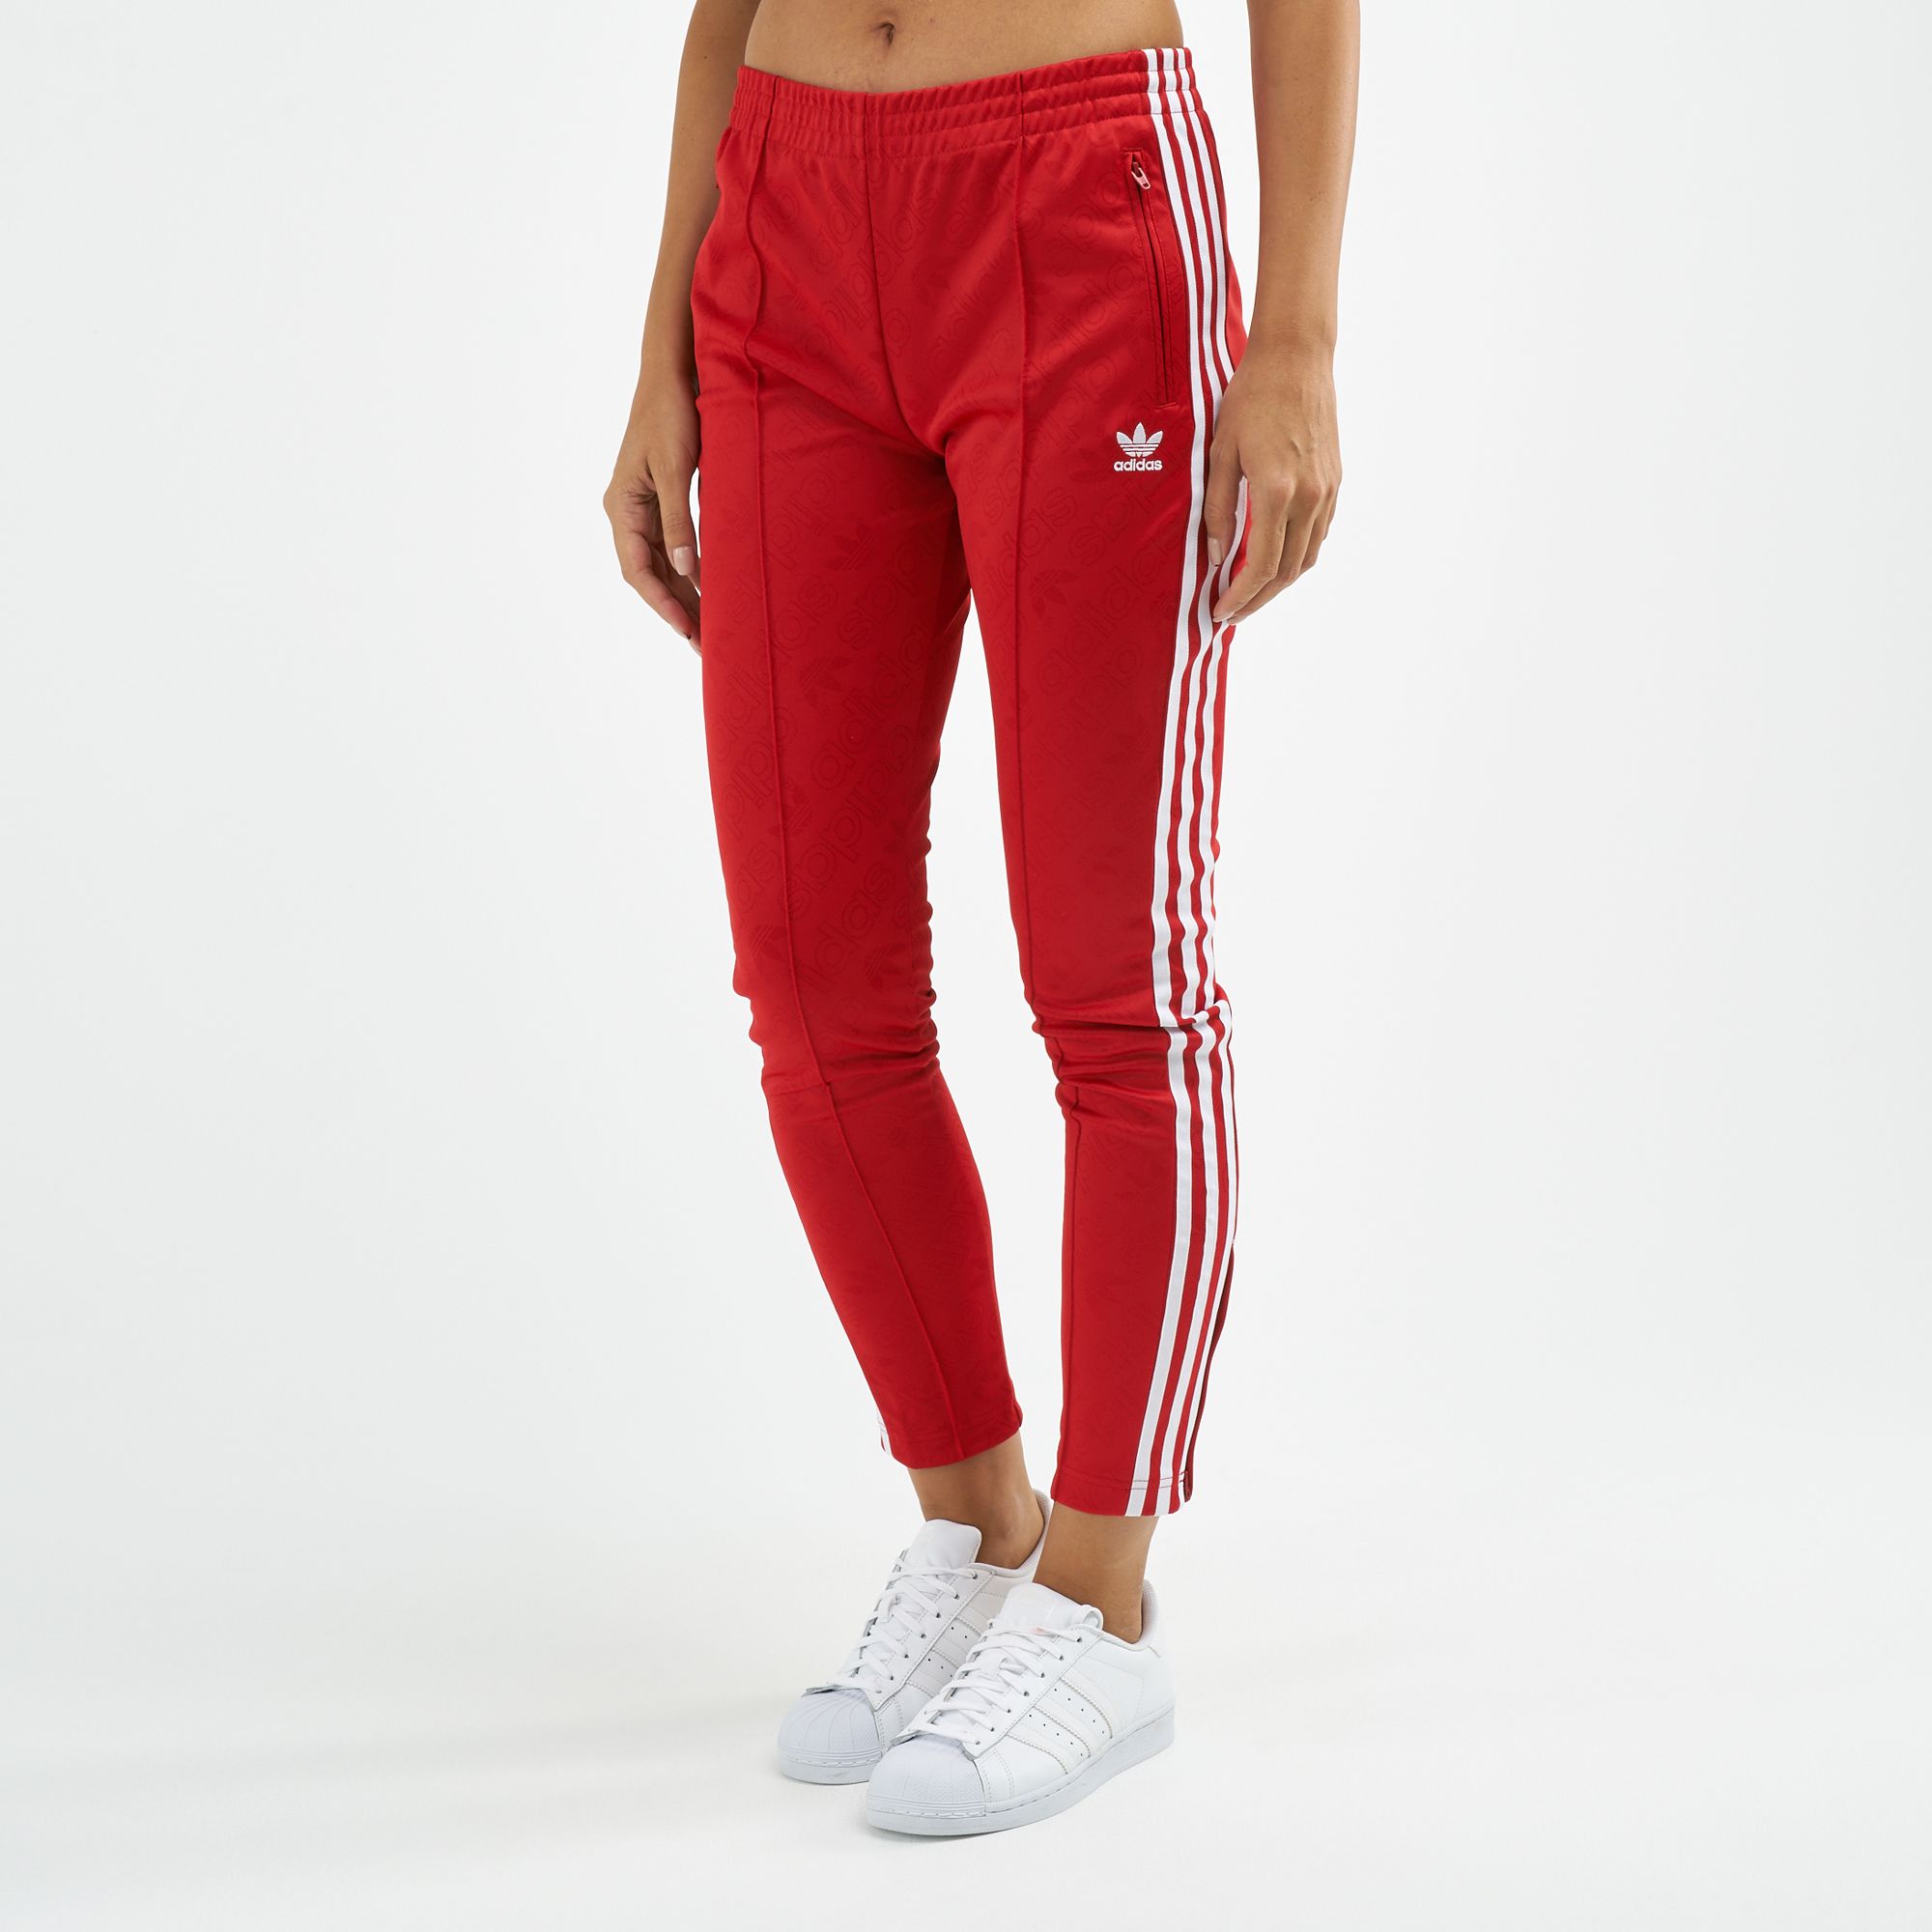 adidas sst track pants womens online shopping sports